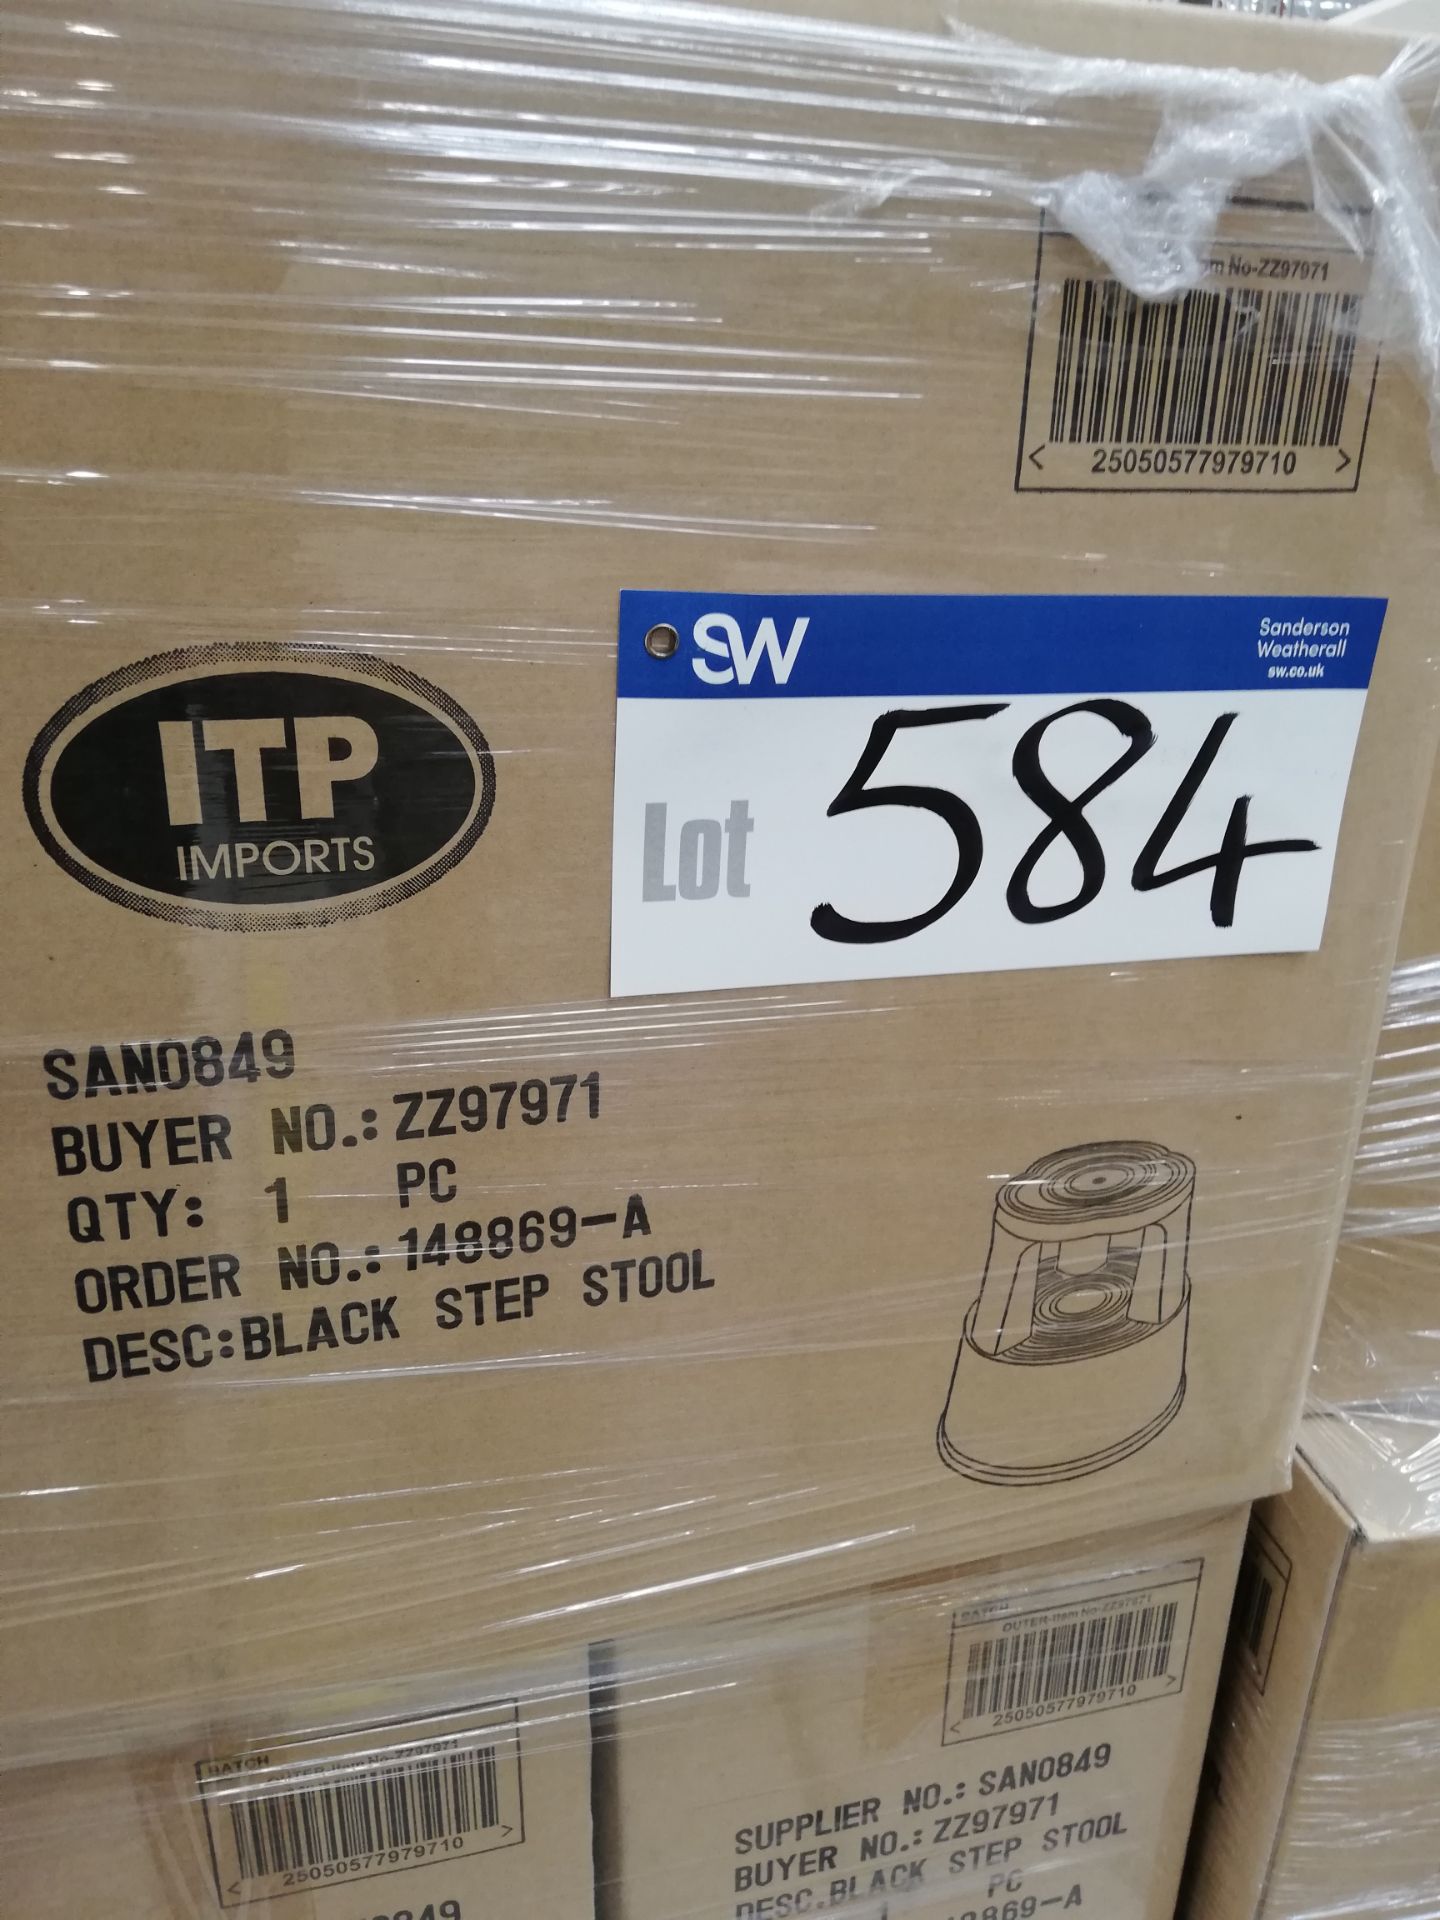 150 x ITP Black Step Stools (Boxed) on 5 pallets